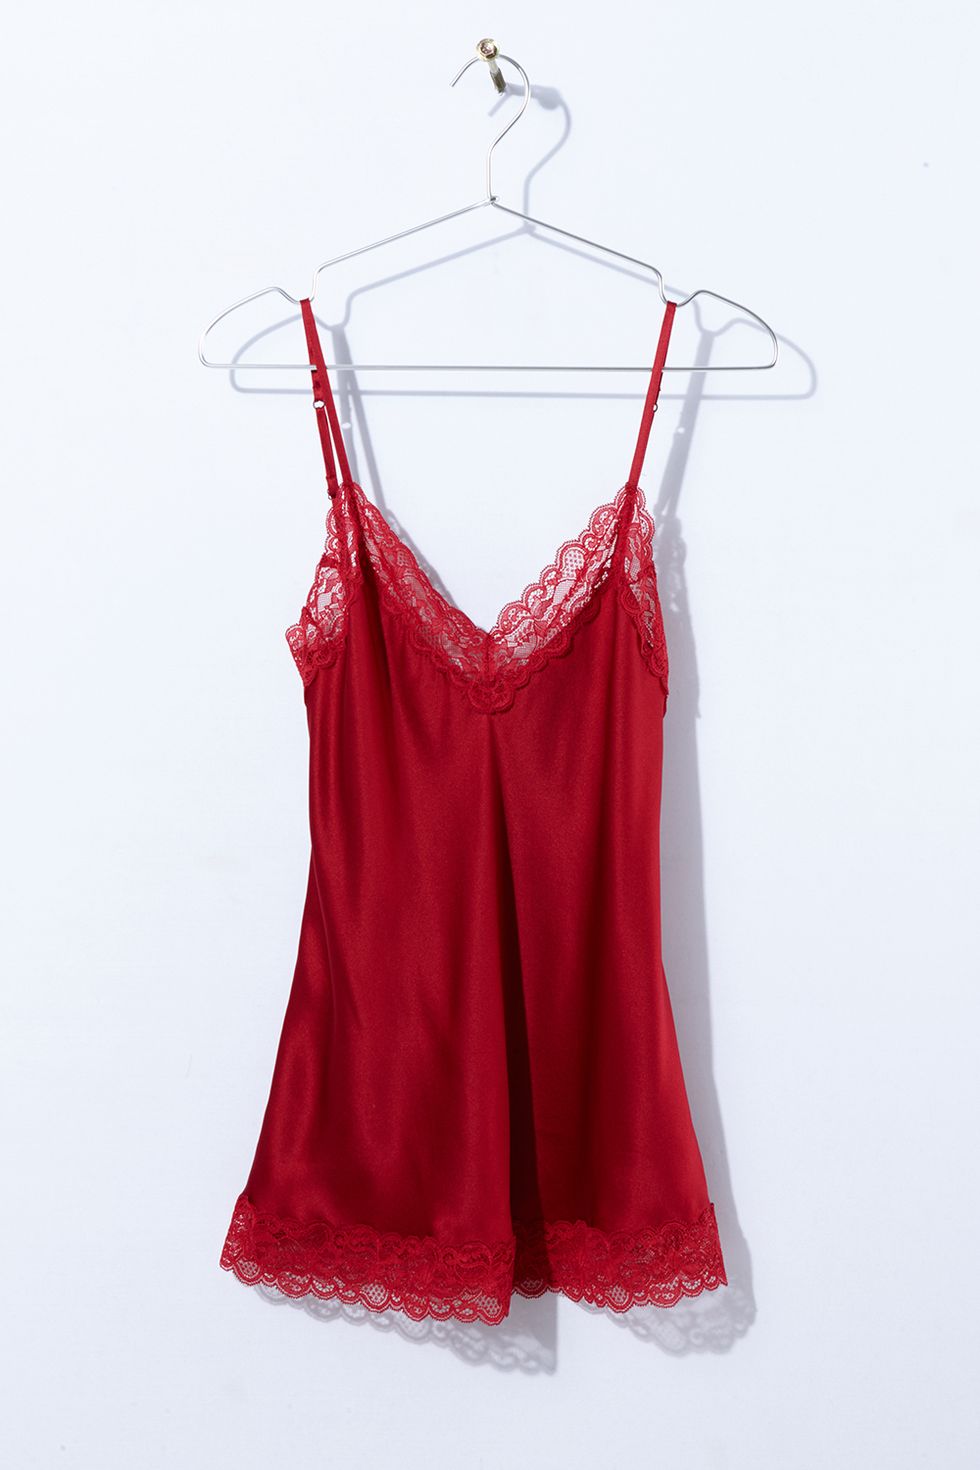 Clothing, Product, White, Red, Clothes hanger, Sleeveless shirt, One-piece garment, Dress, Carmine, Fashion, 